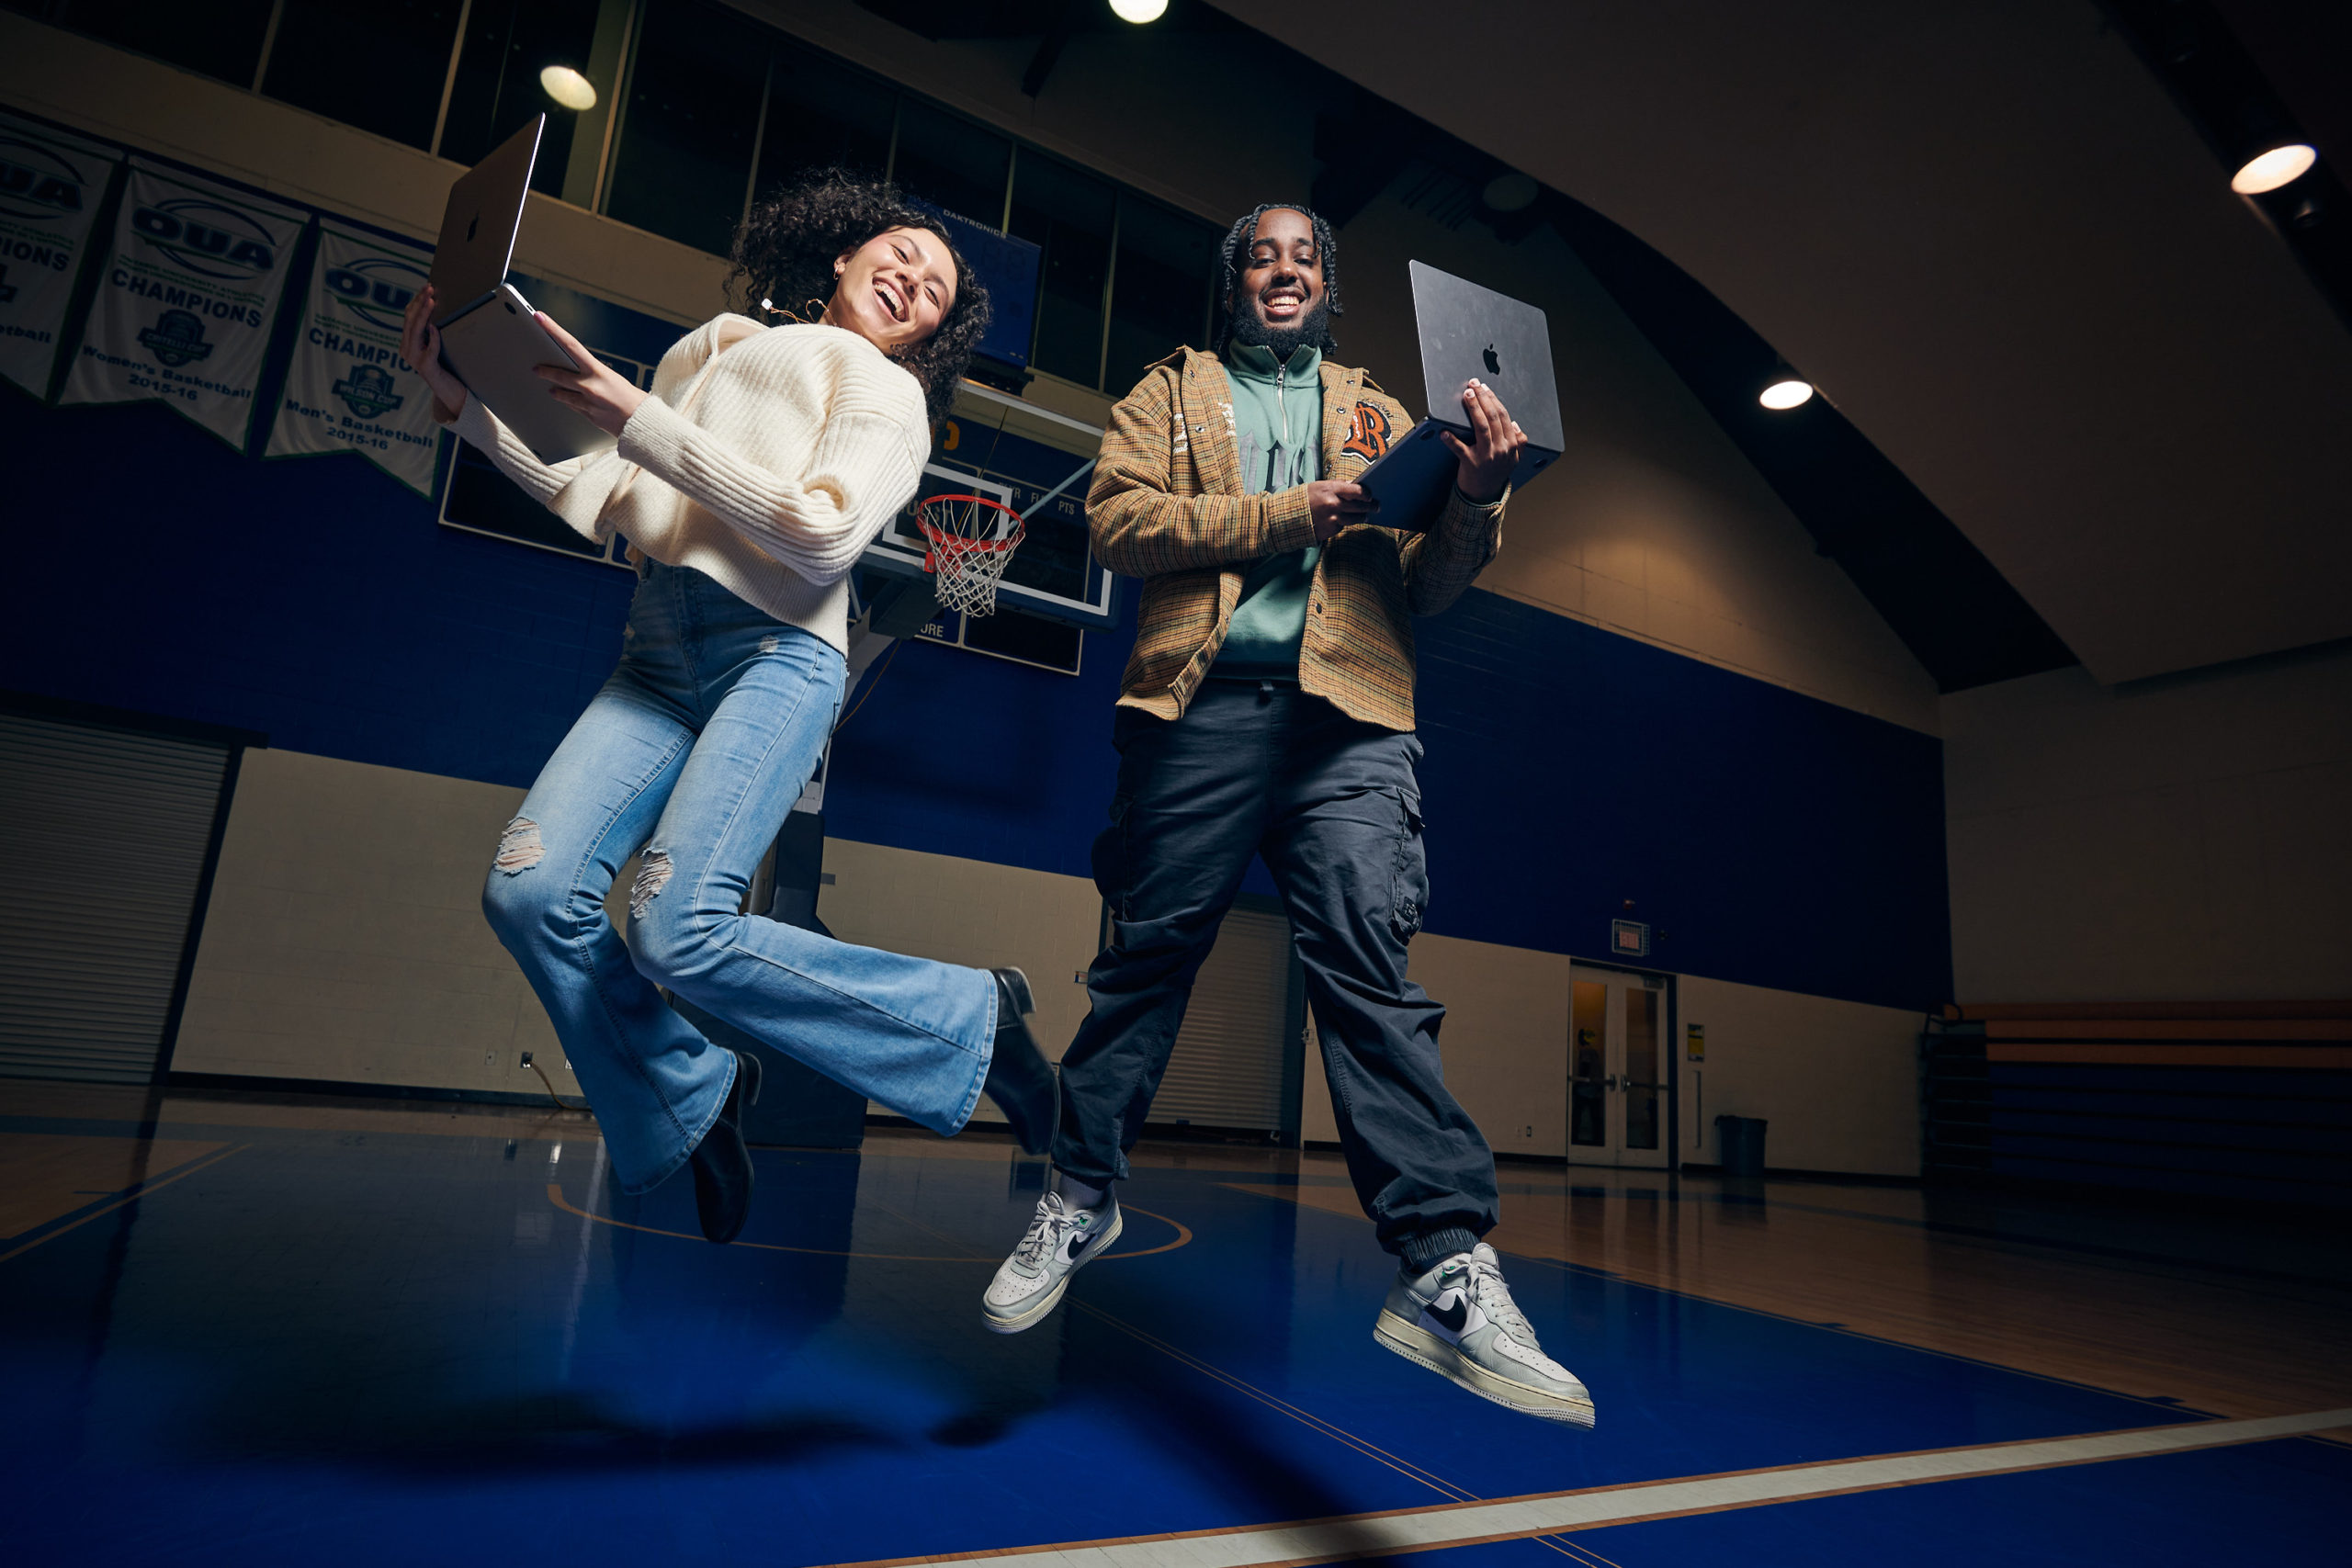 Two people jump holding laptops on a basketball court